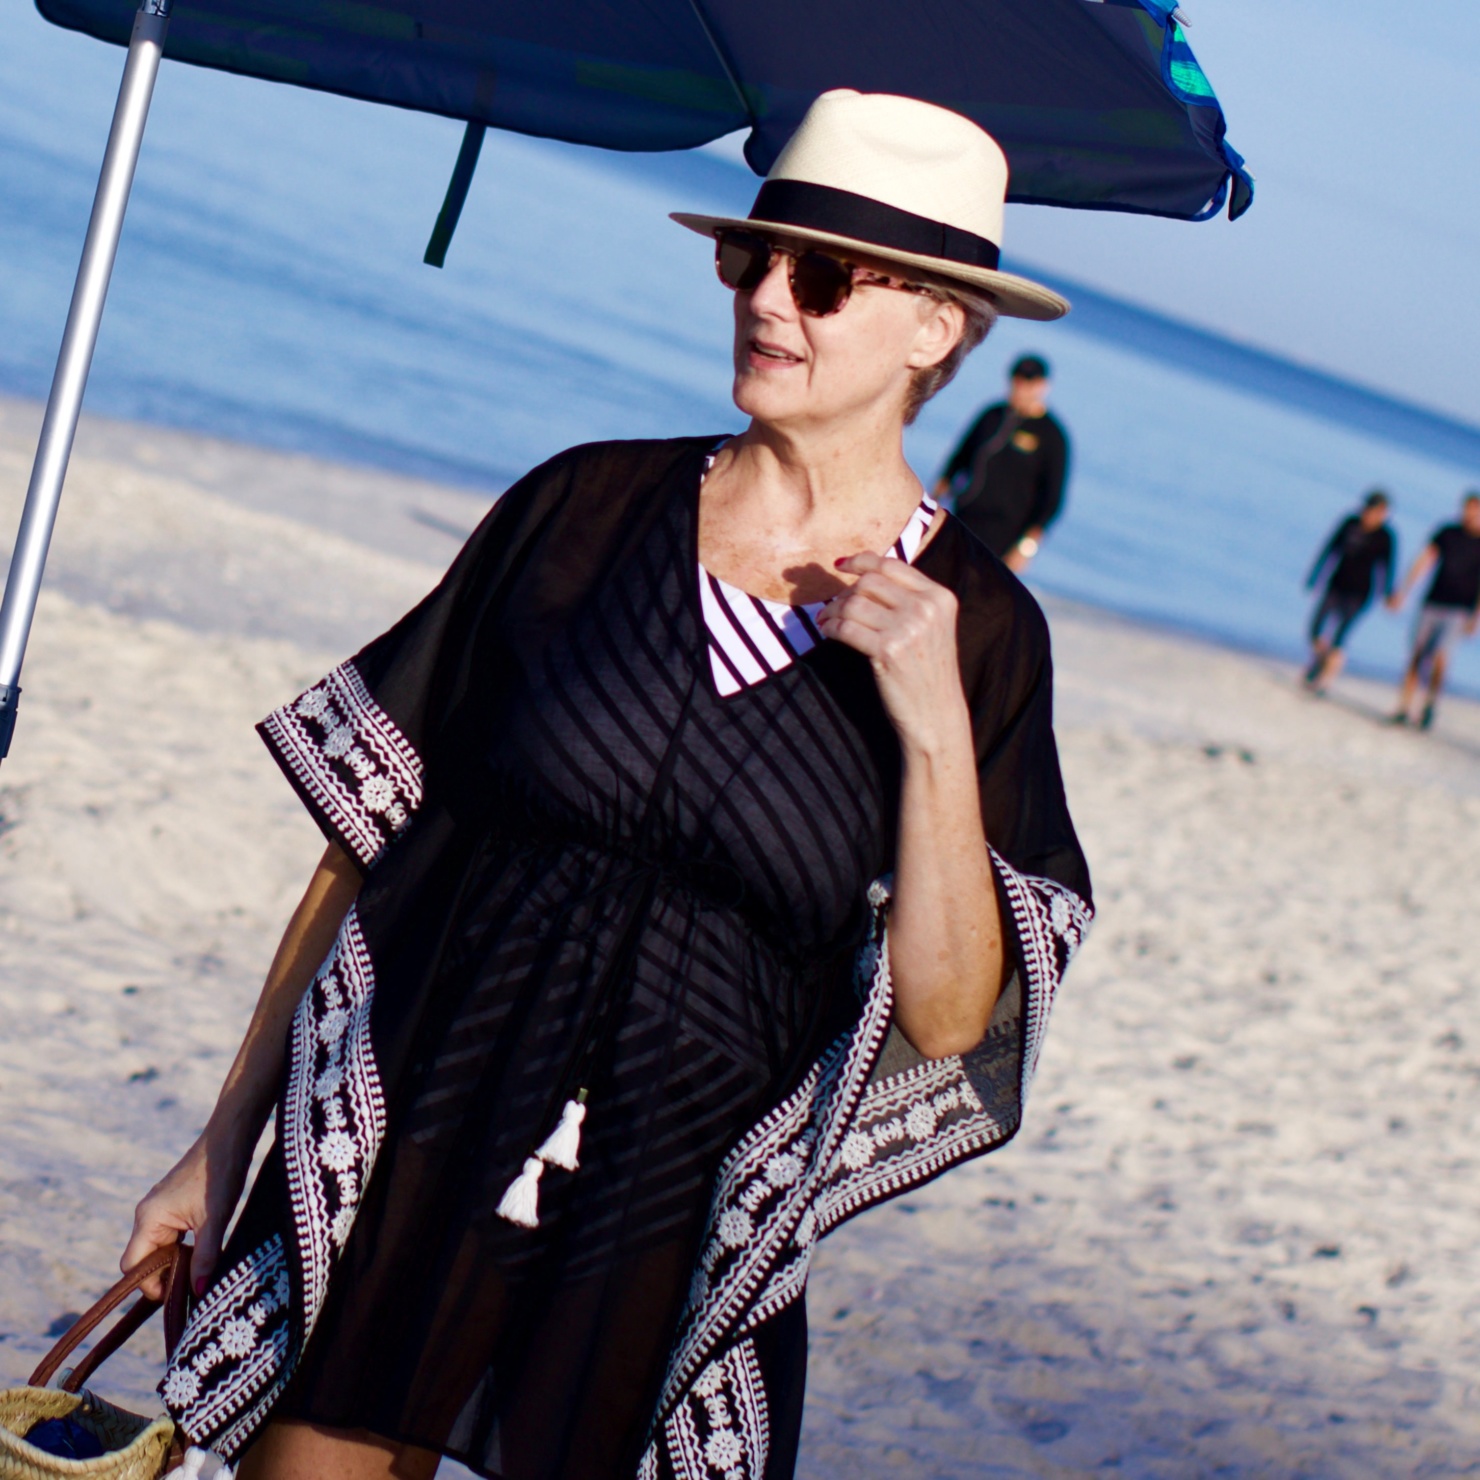 beth from Style at a Certain Age wears beach essentials, Ralph Lauren striped one-piece swimsuit, Tory Burch cover-up, jelly flip-flops, panama hat, and straw tote